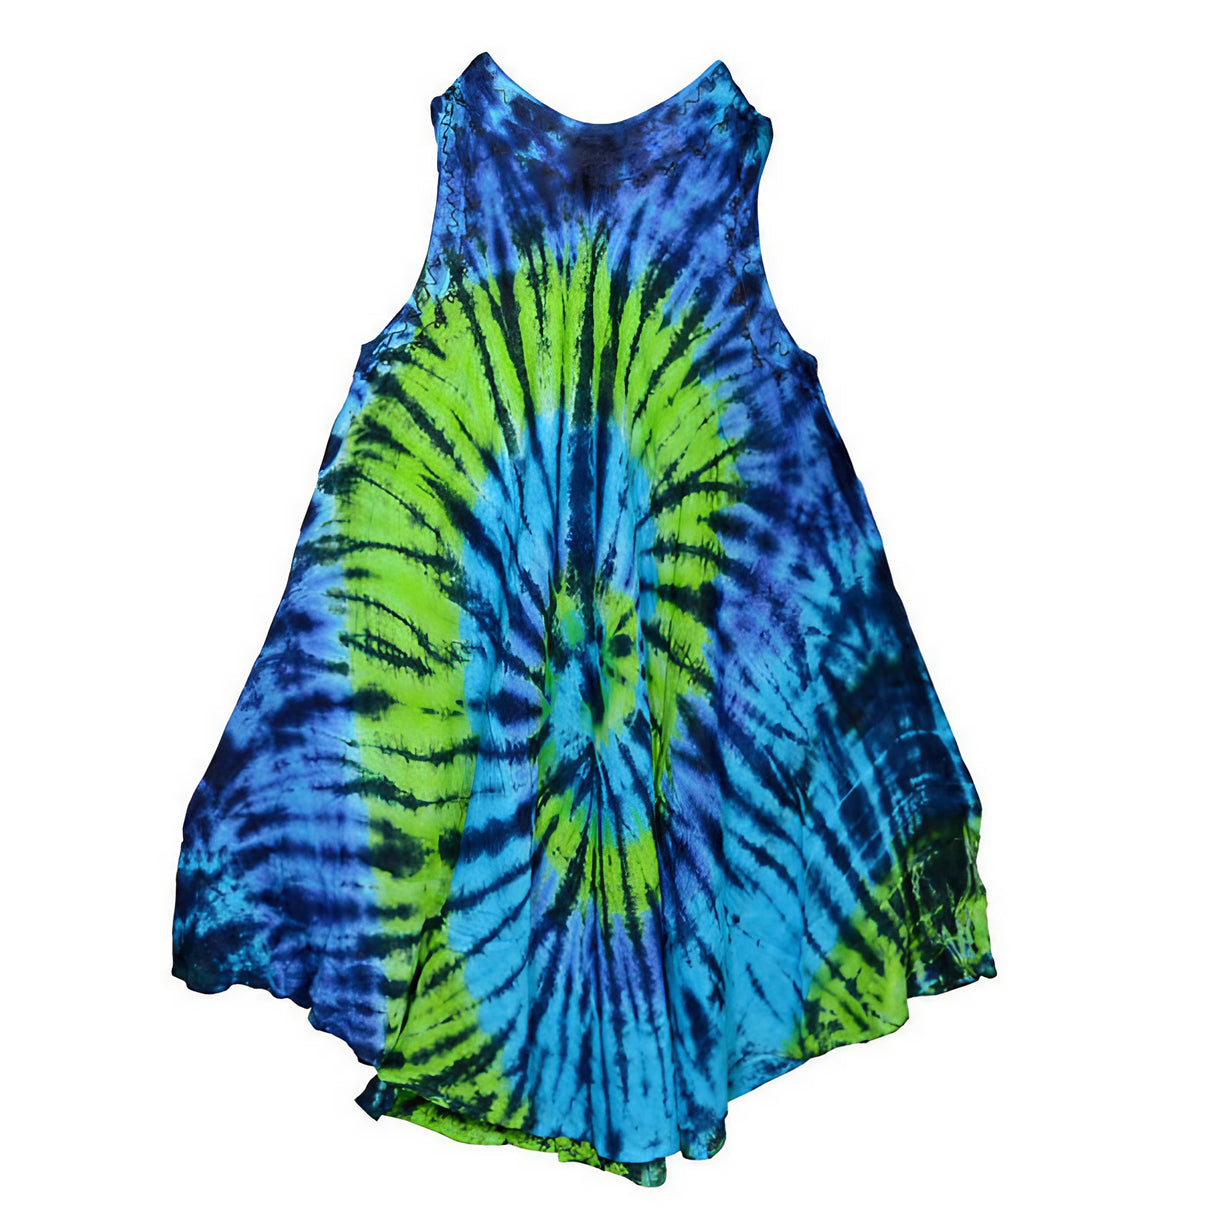 Colorful Spiral Tie Dye Dress in One Size, Front View on Seamless White Background